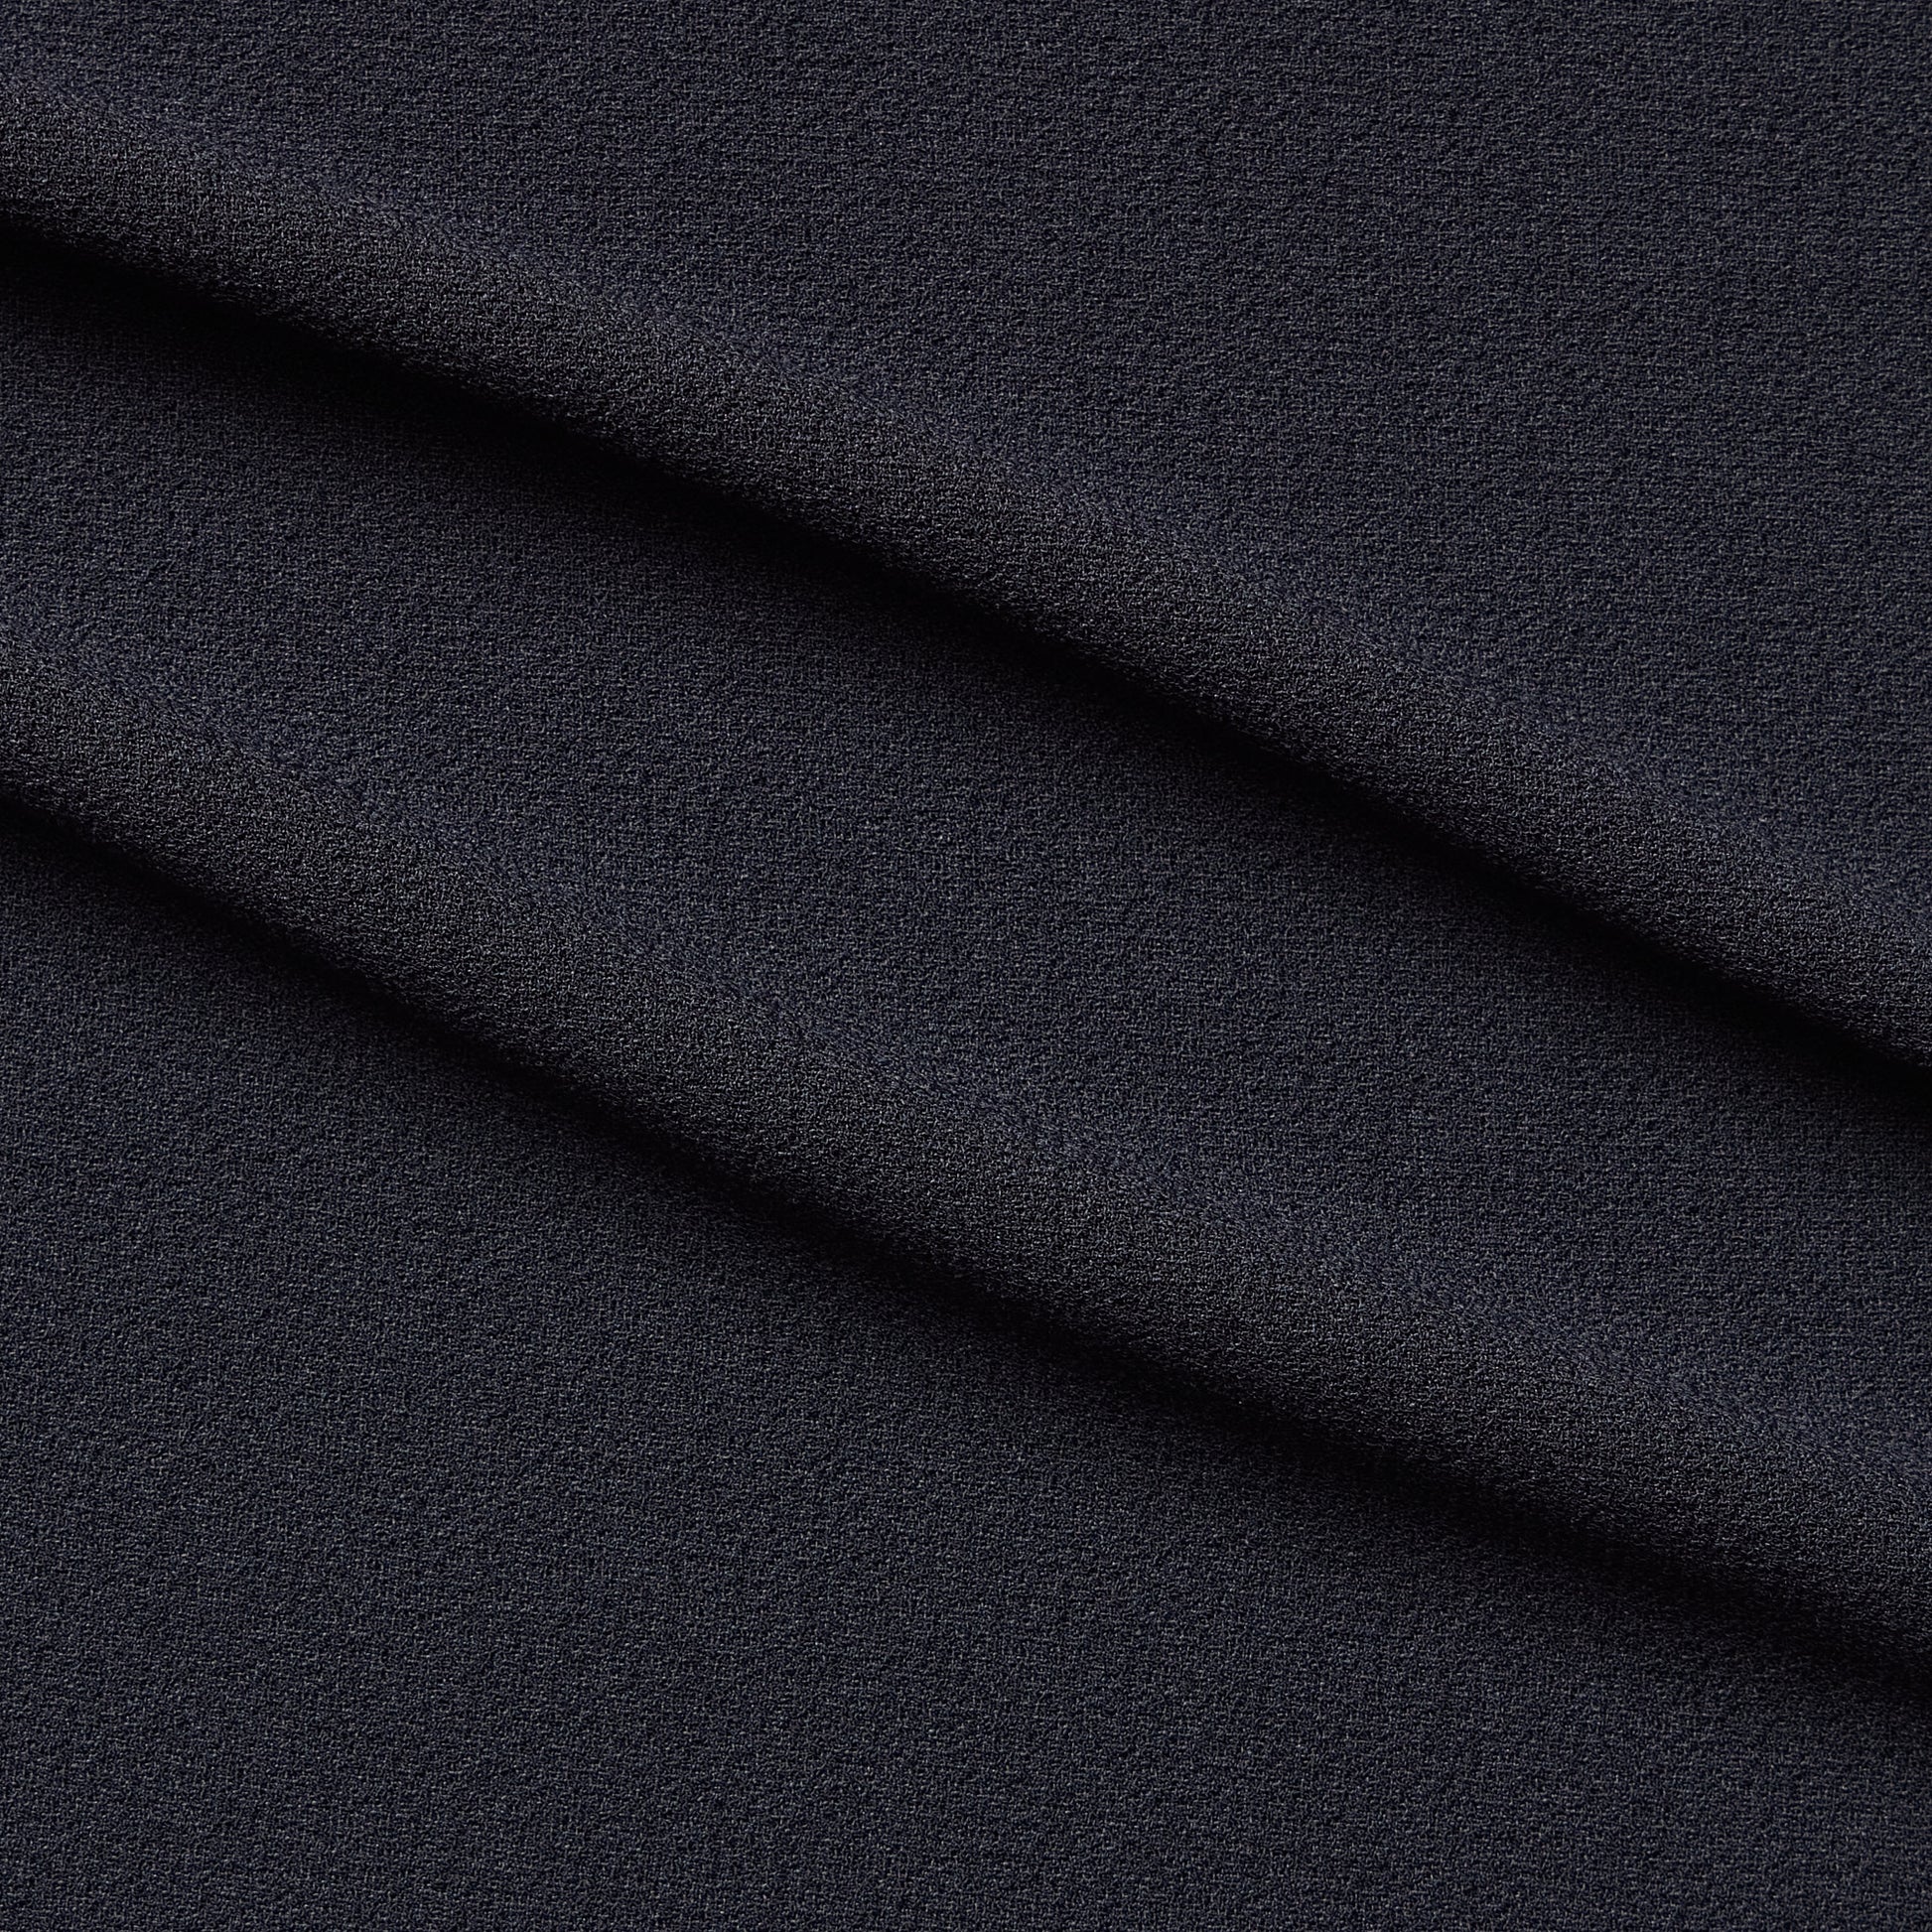 London Crepe presenting the charcoal color version with 2 way stretch knit polyester with spandex